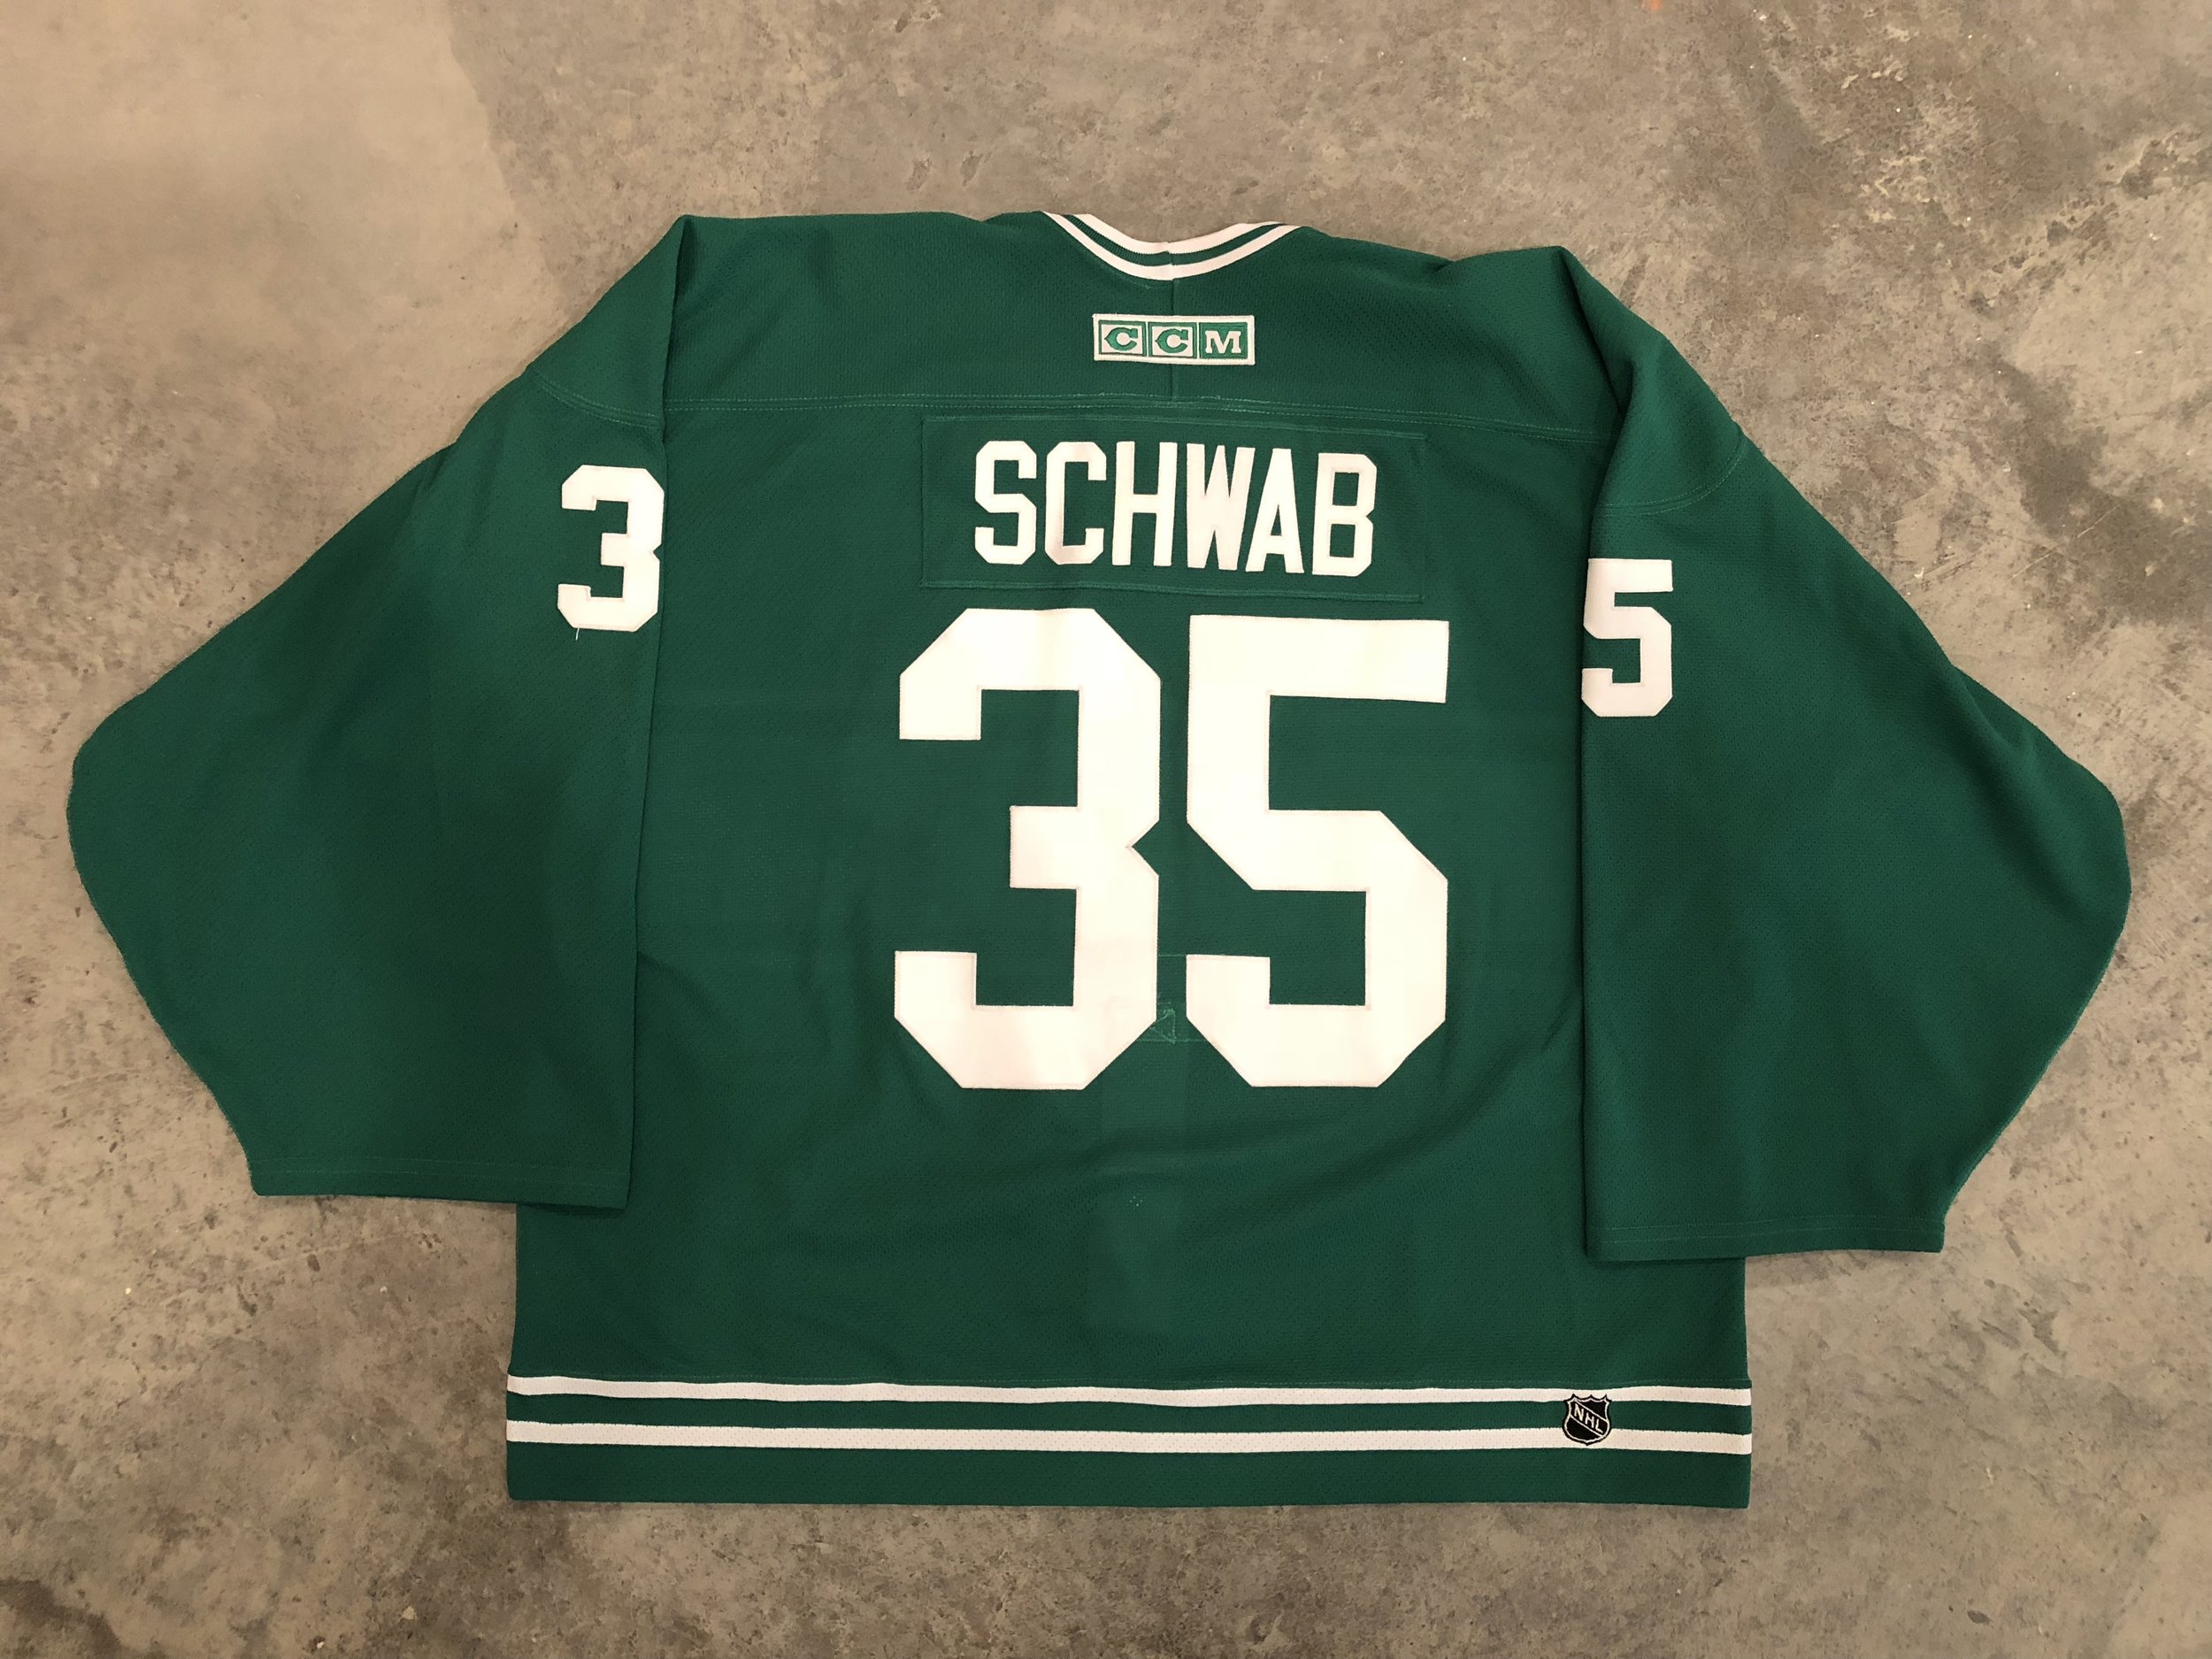 The Leafs are giving away their unused St. Pats jerseys to healthcare  workers - Article - Bardown